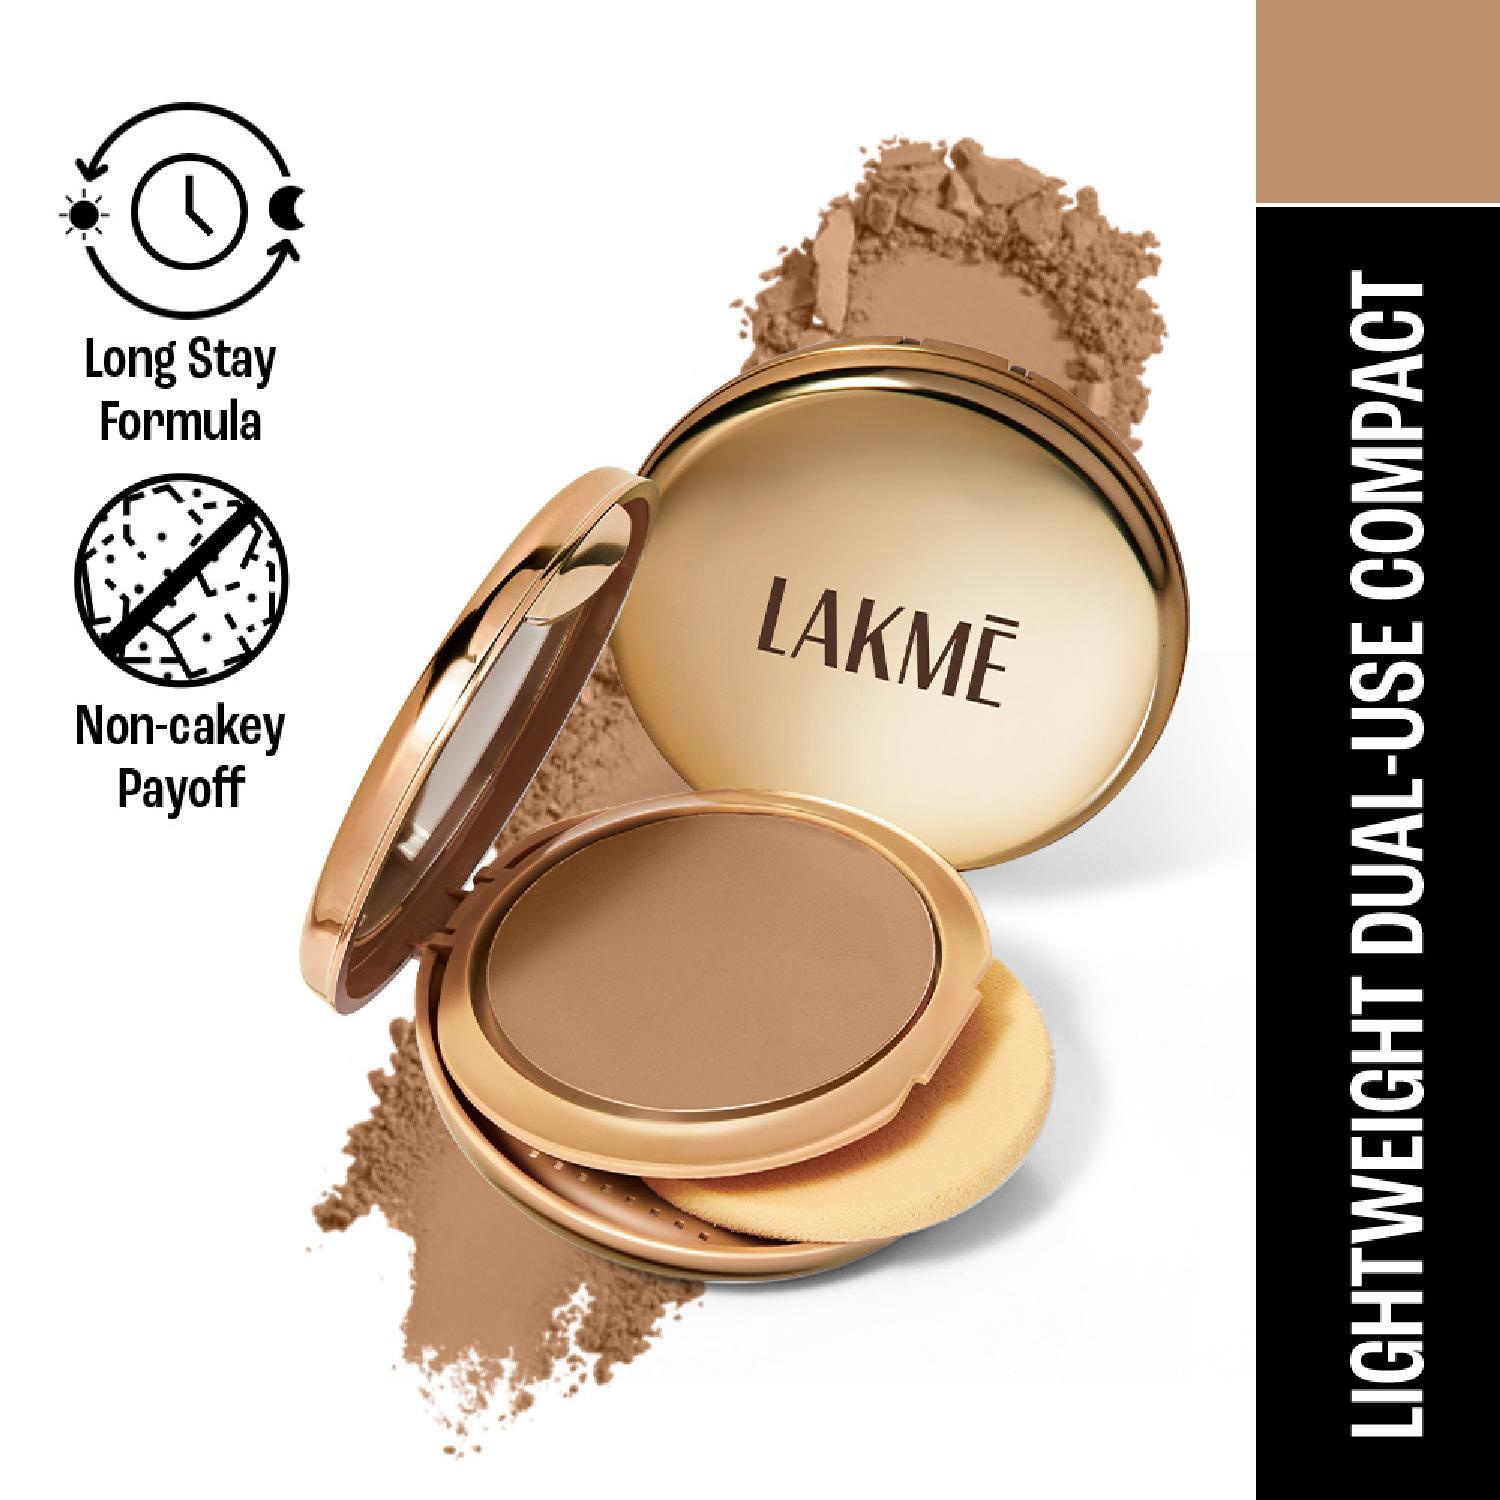 Lakme | Lakme 9 to 5 Unreal Dual Cover Pressed Powder, 2 In 1 Compact + Foundation, 34 Almond (9g)